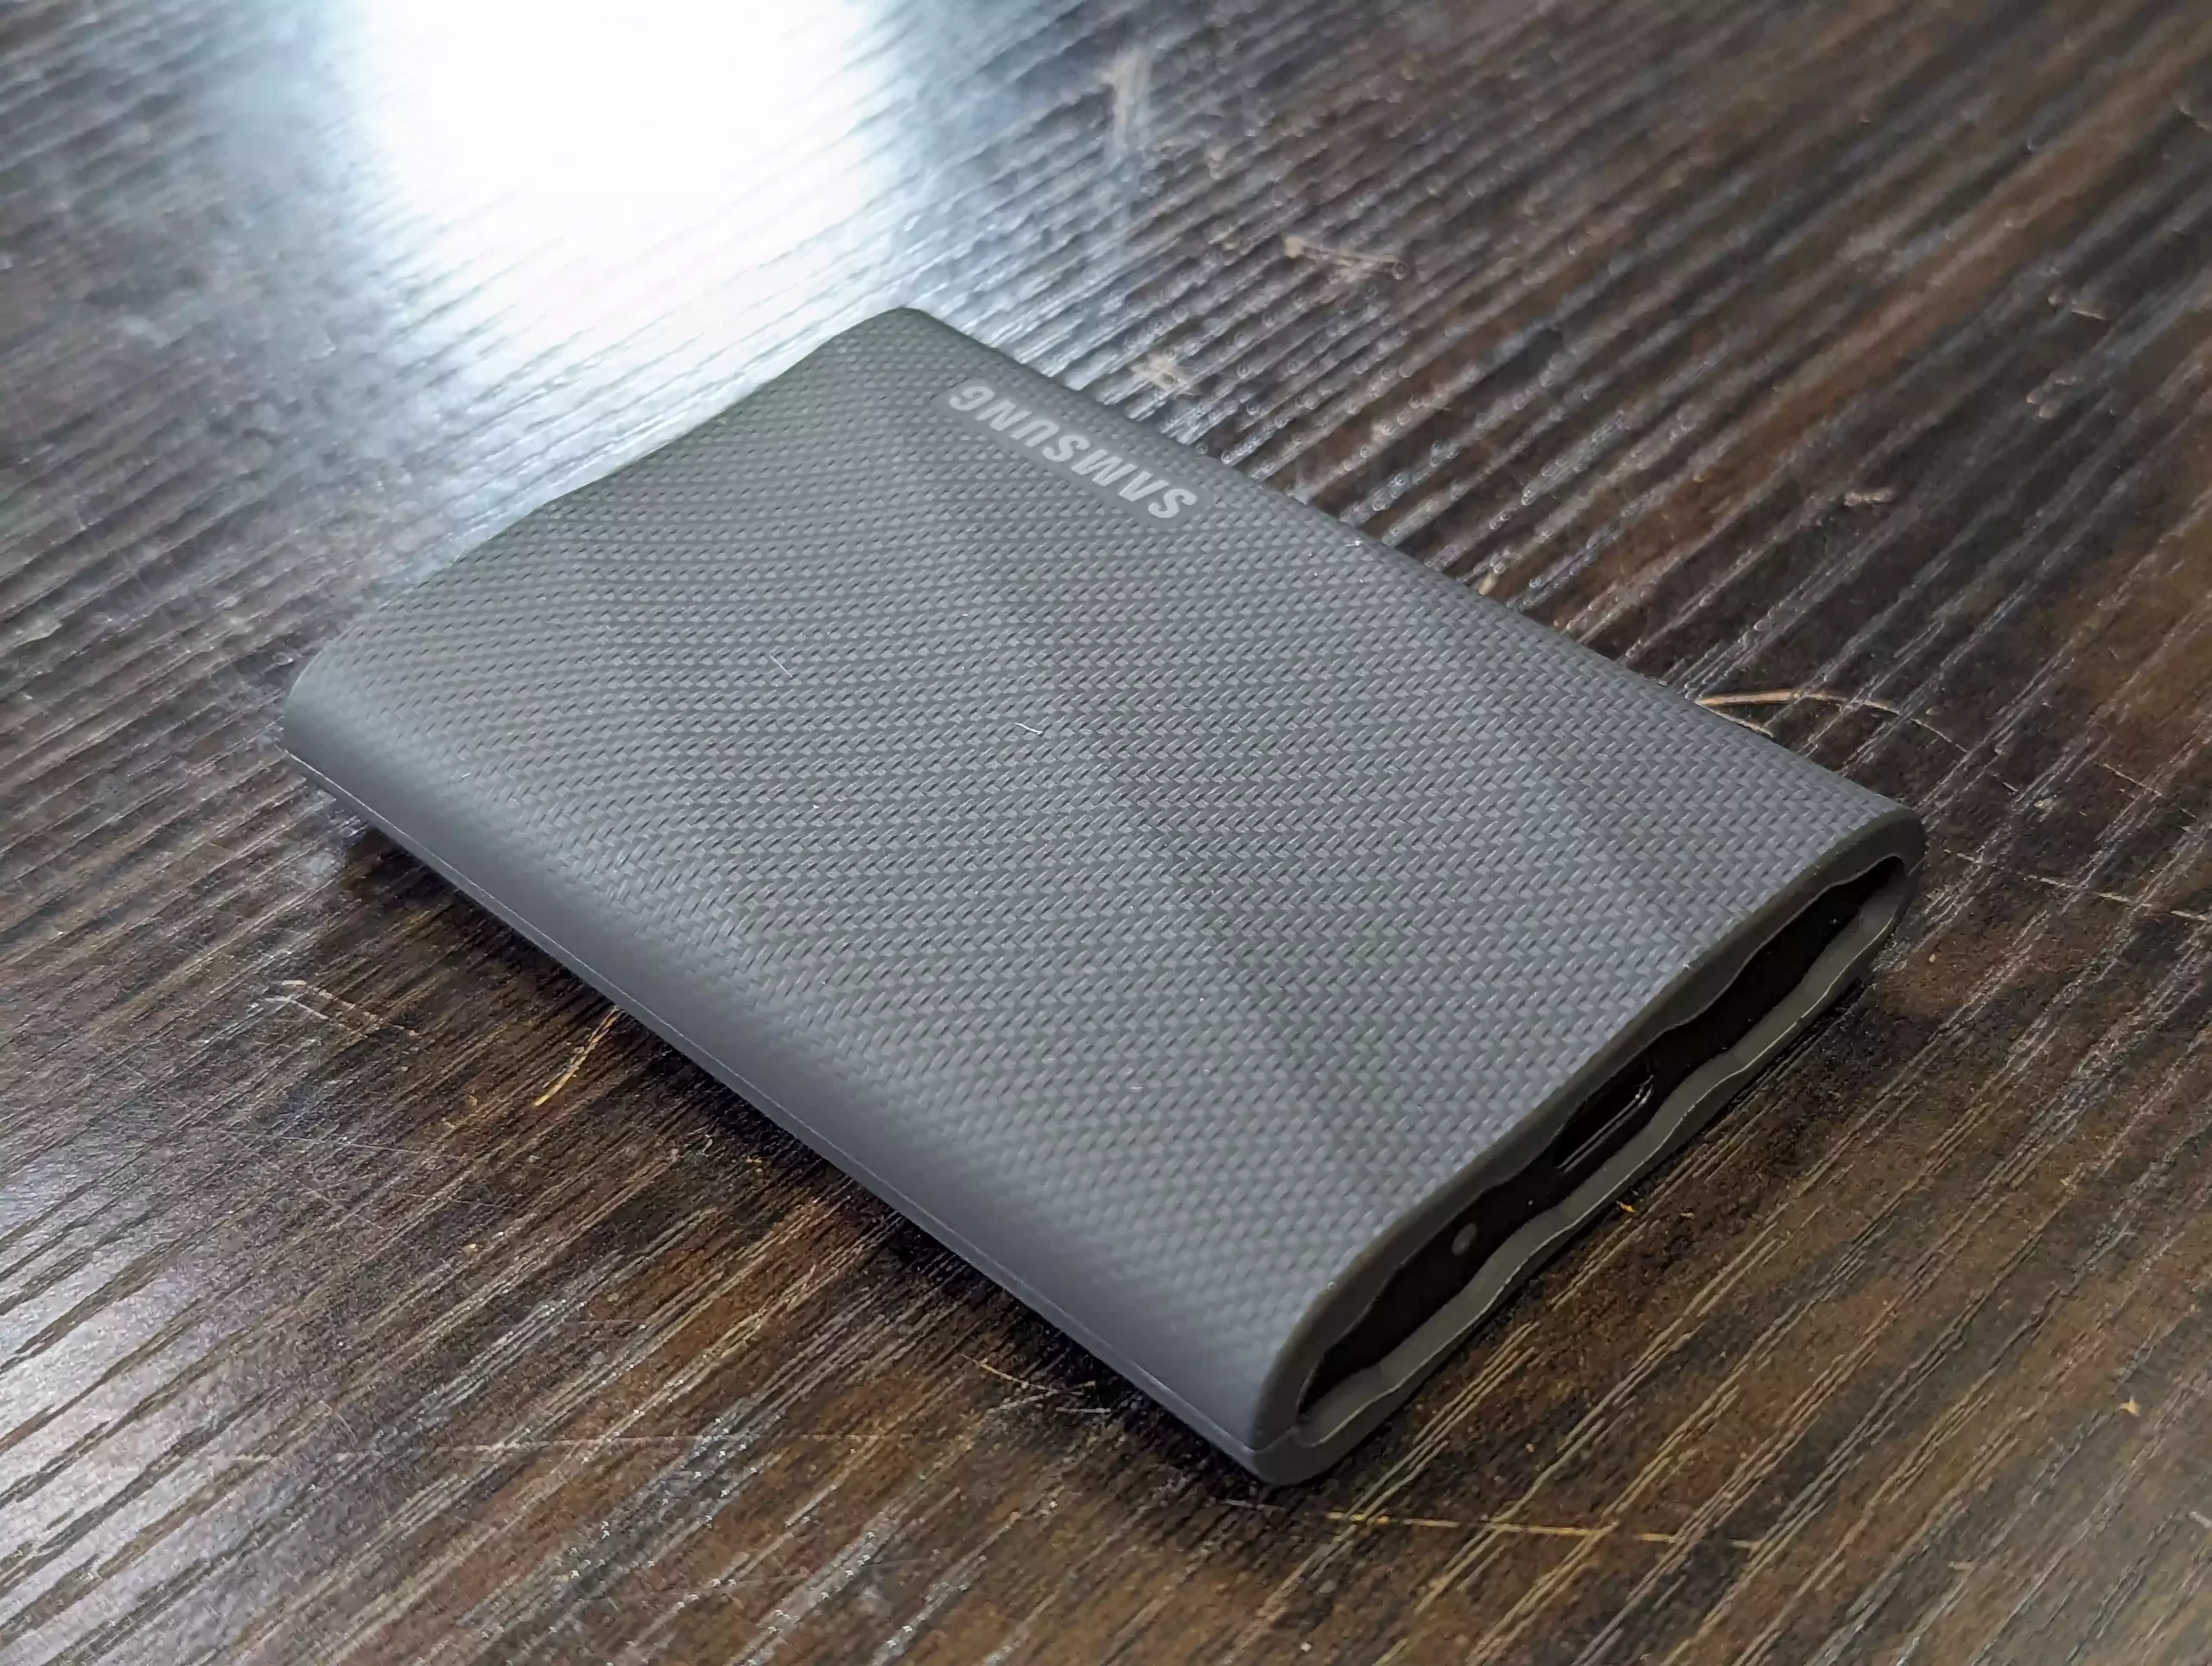 Samsung T9 Portable SSD Review: Fast and future-proof - Alex